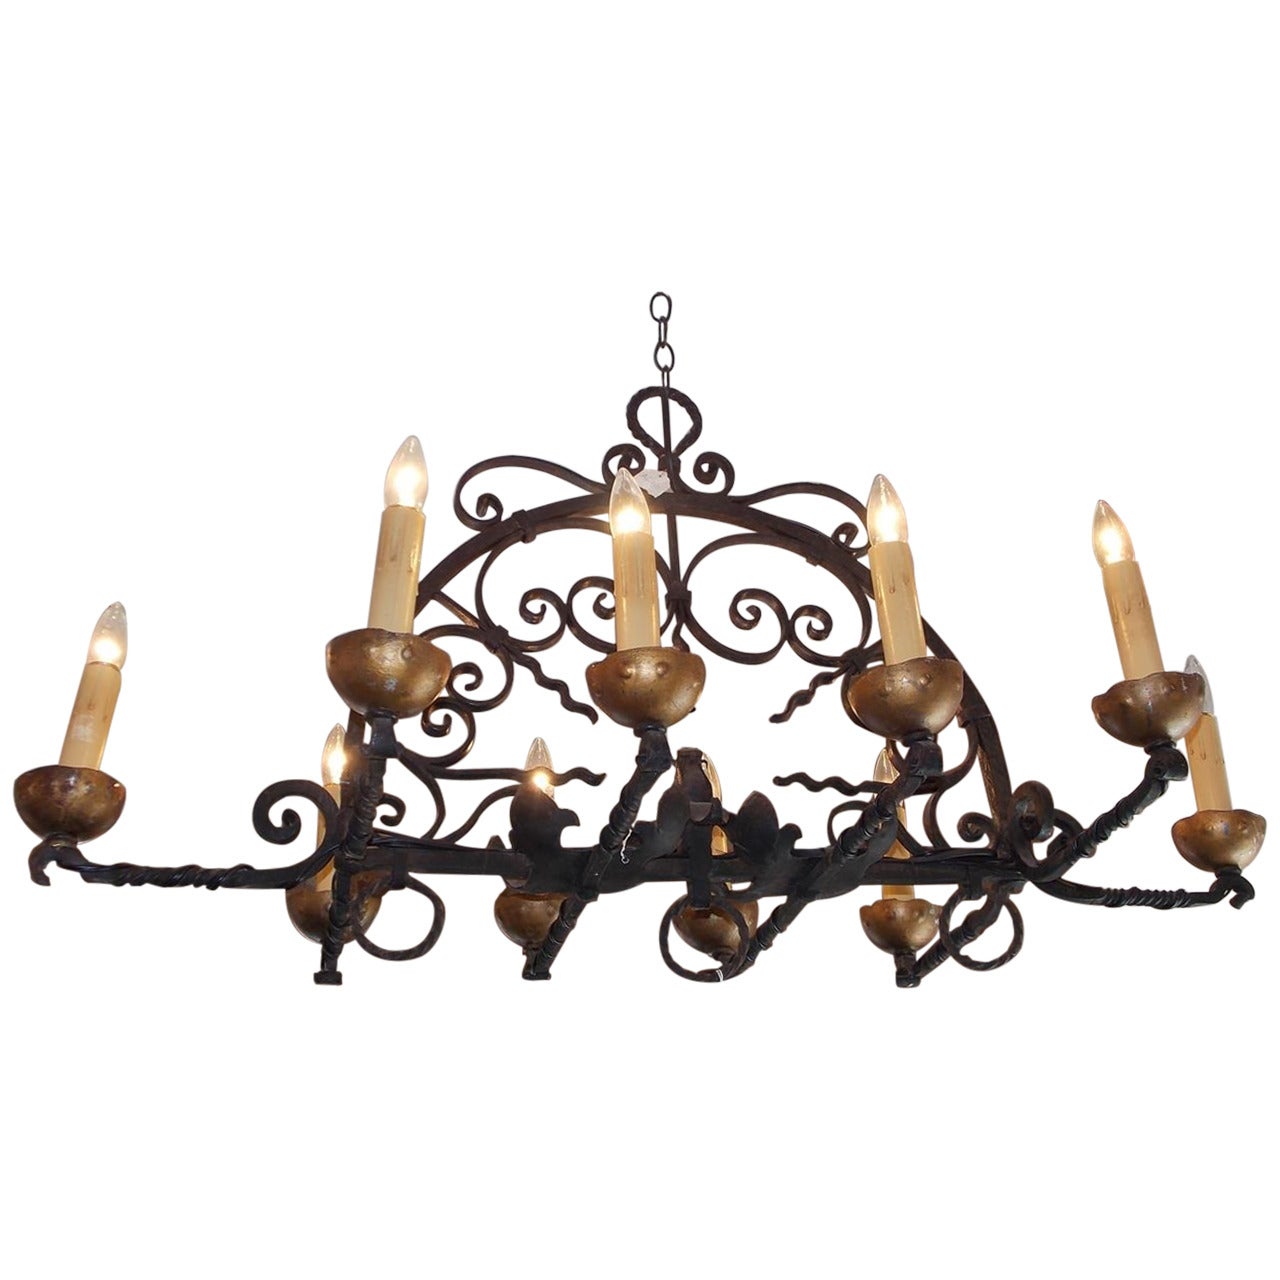 French Wrought Iron and Gilt Elongated Chandelier, Circa 1850